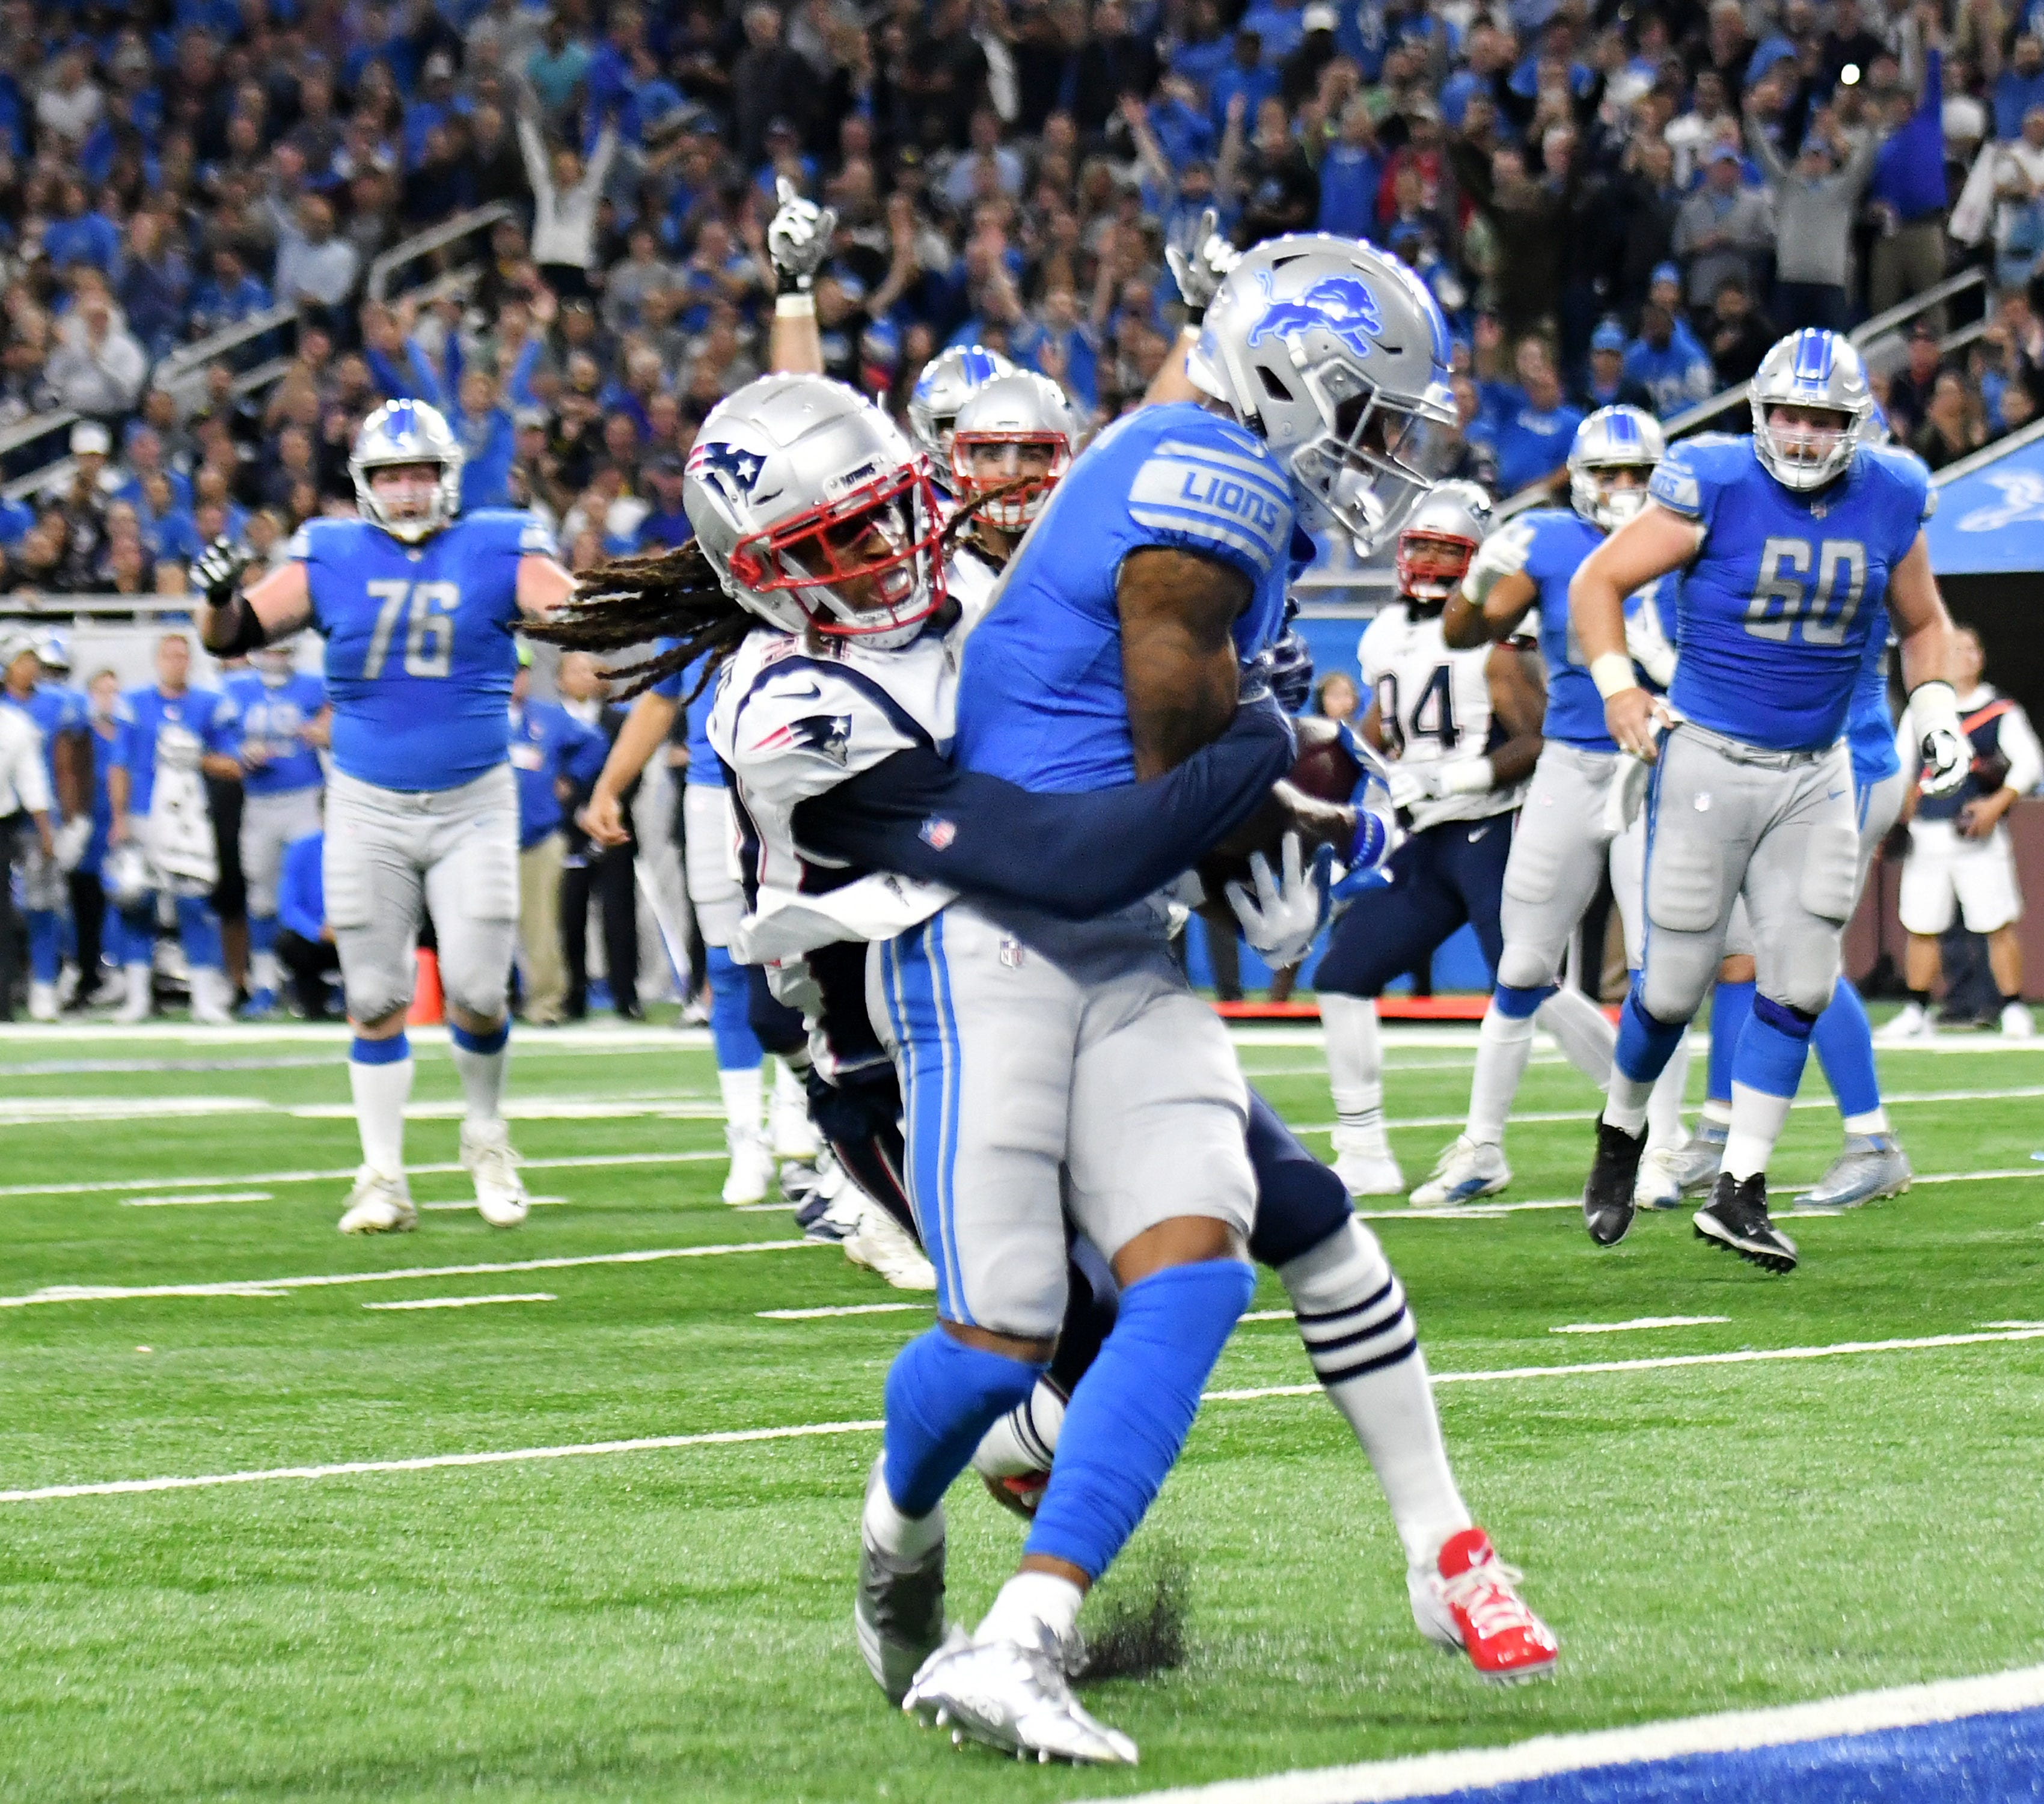 Patriots ' Stephon Gilmore, left, tries to tackle Lions ' Kenny Golladay at the goal line in the second quarter. The ball was initially ruled short of the goal line, but after a challenge and review the call was overturned and ruled a touchdown.